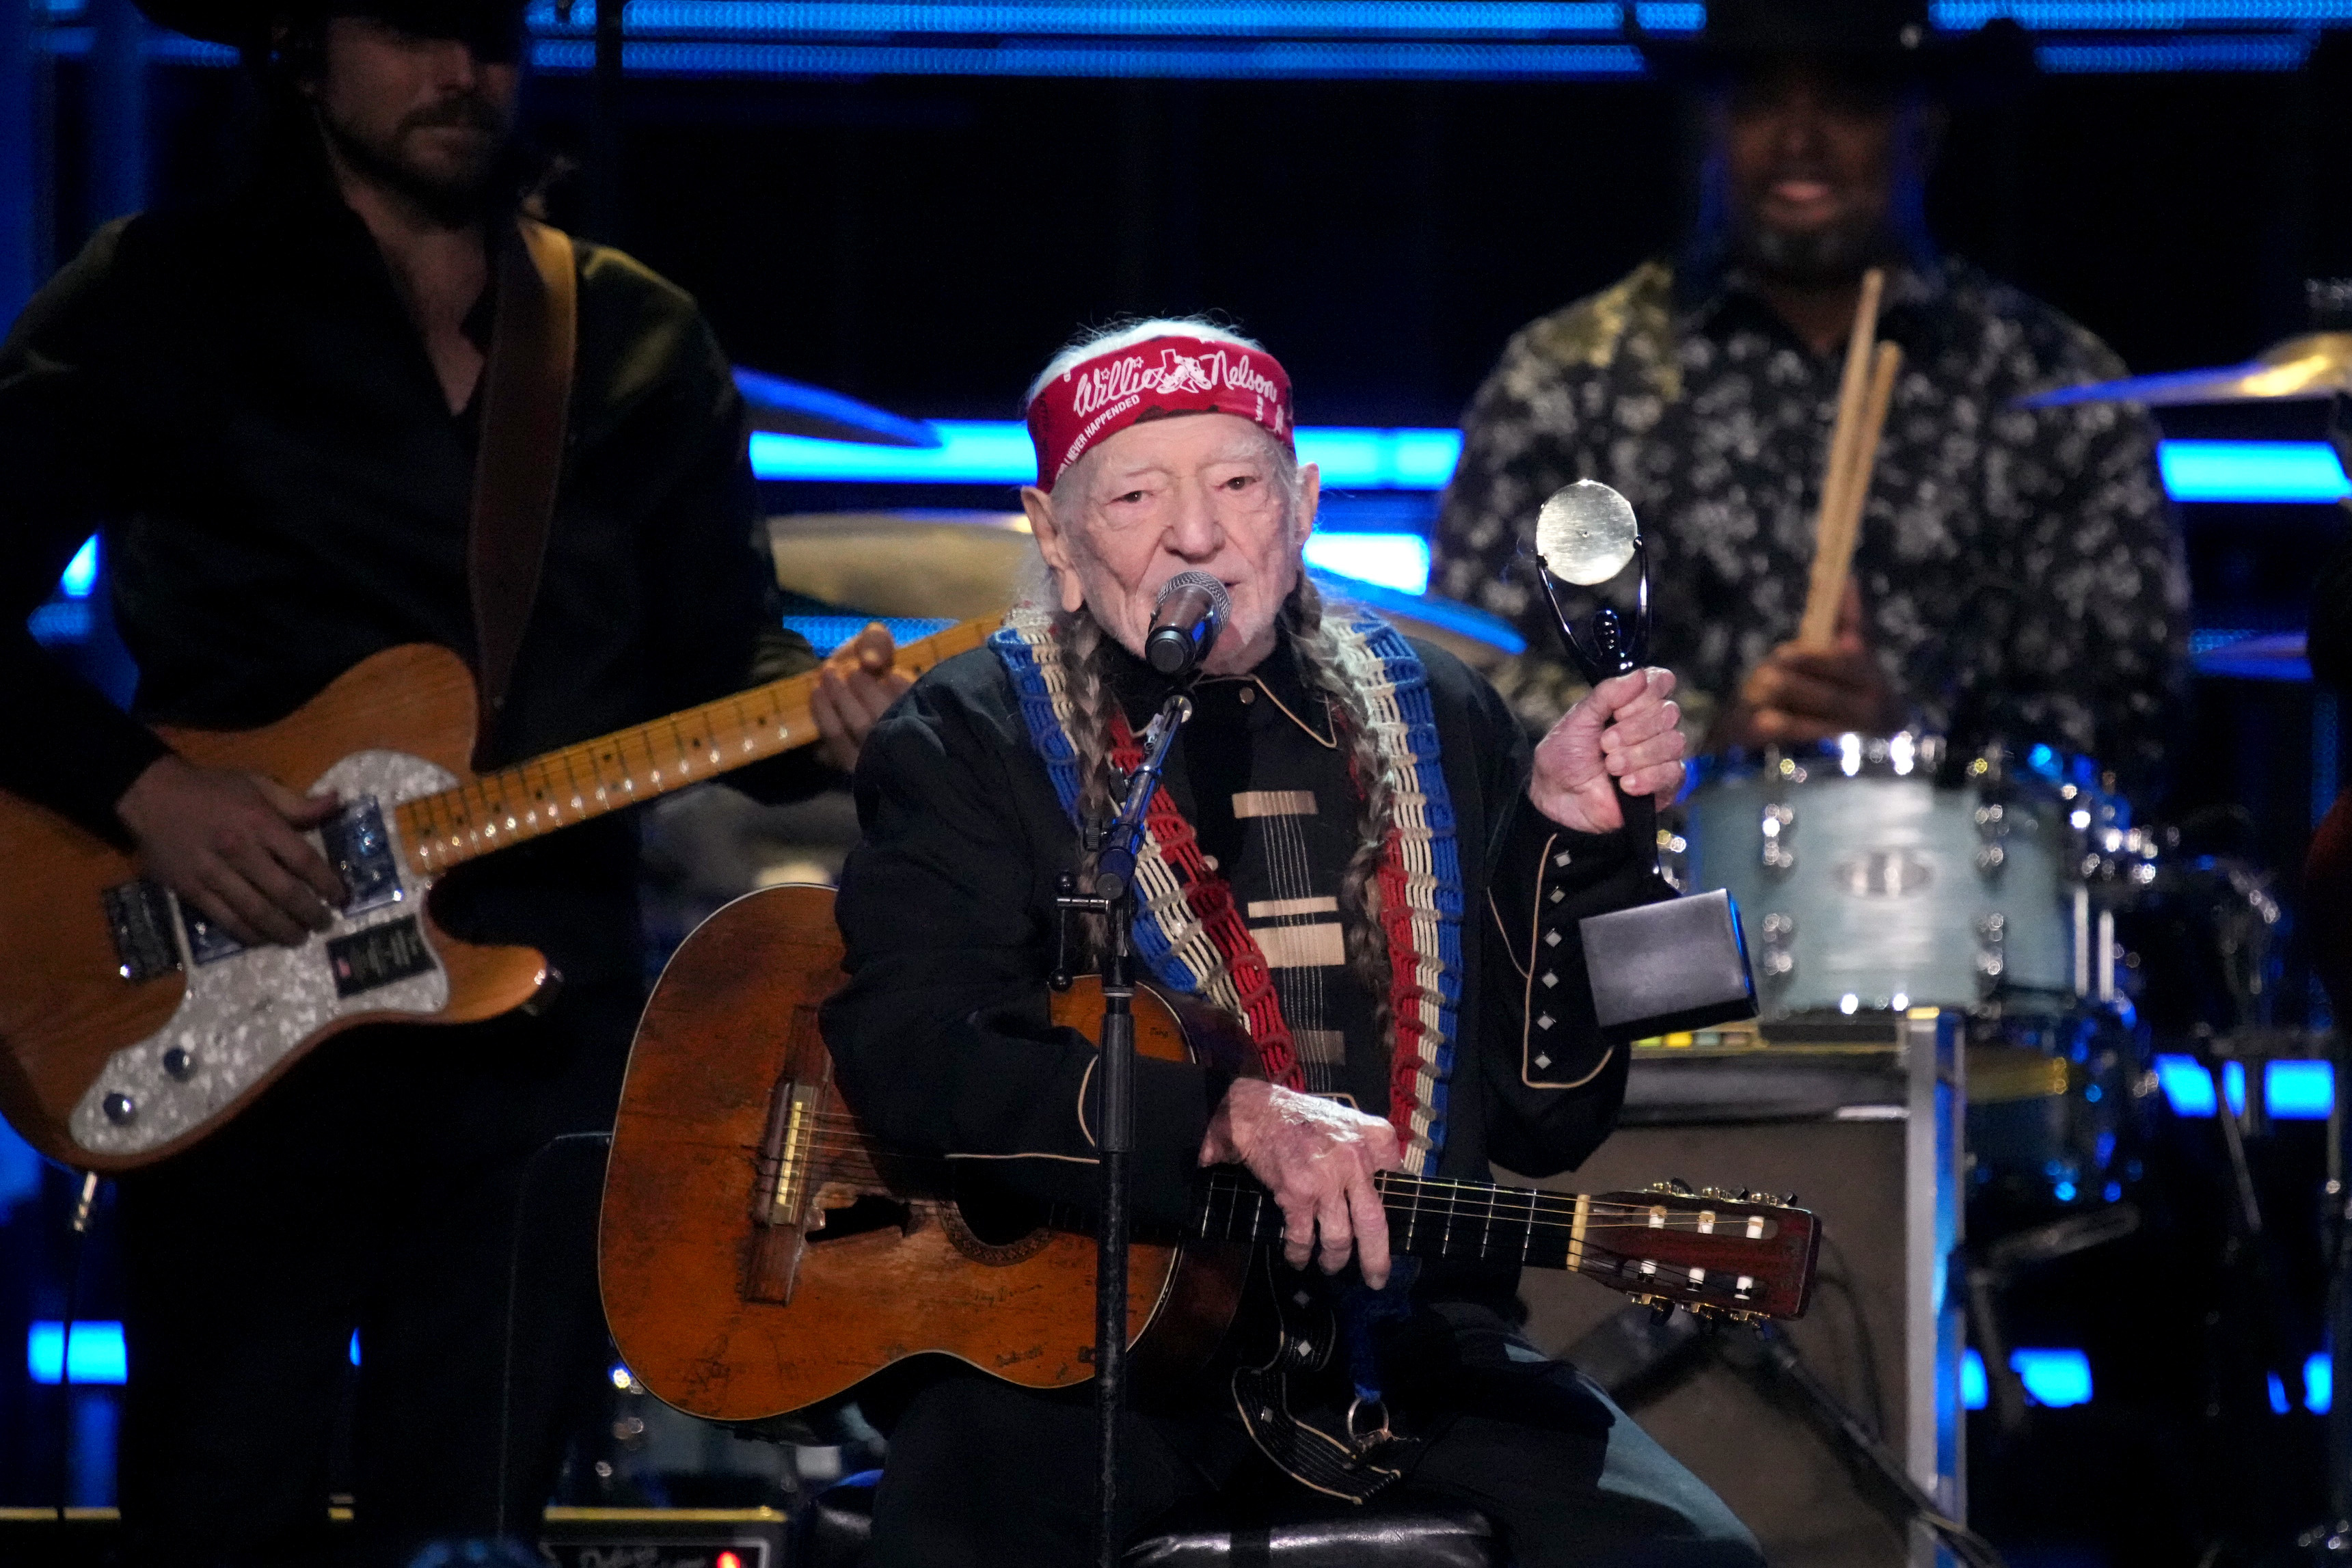 The 91-year-old singer was slated to do several performances in the coming days